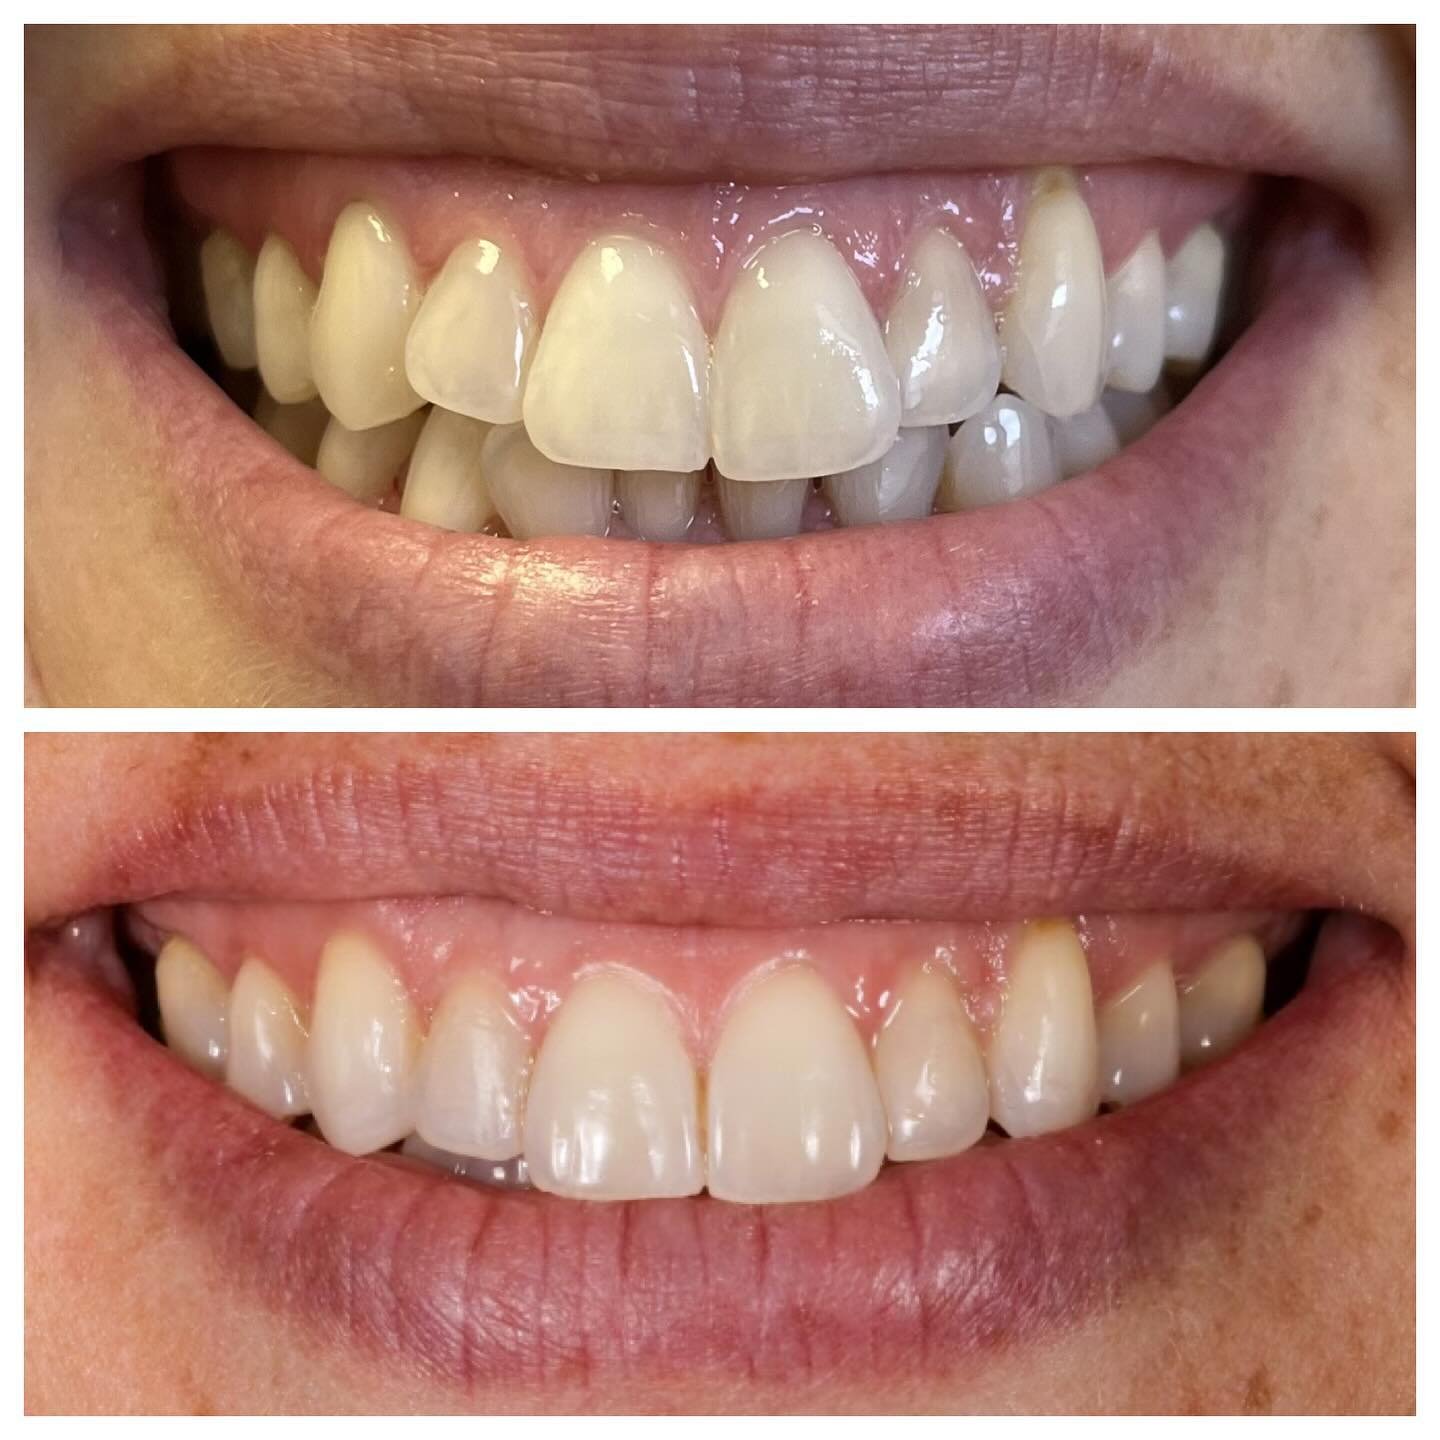 ✨ Smile Transformation Alert! ✨

After one year of treatment with clear aligners, our patient achieved the beautiful smile she deserves.

Each step of the way, the aligners worked to correct crowding and alignment, resulting in esthetic enhancement a